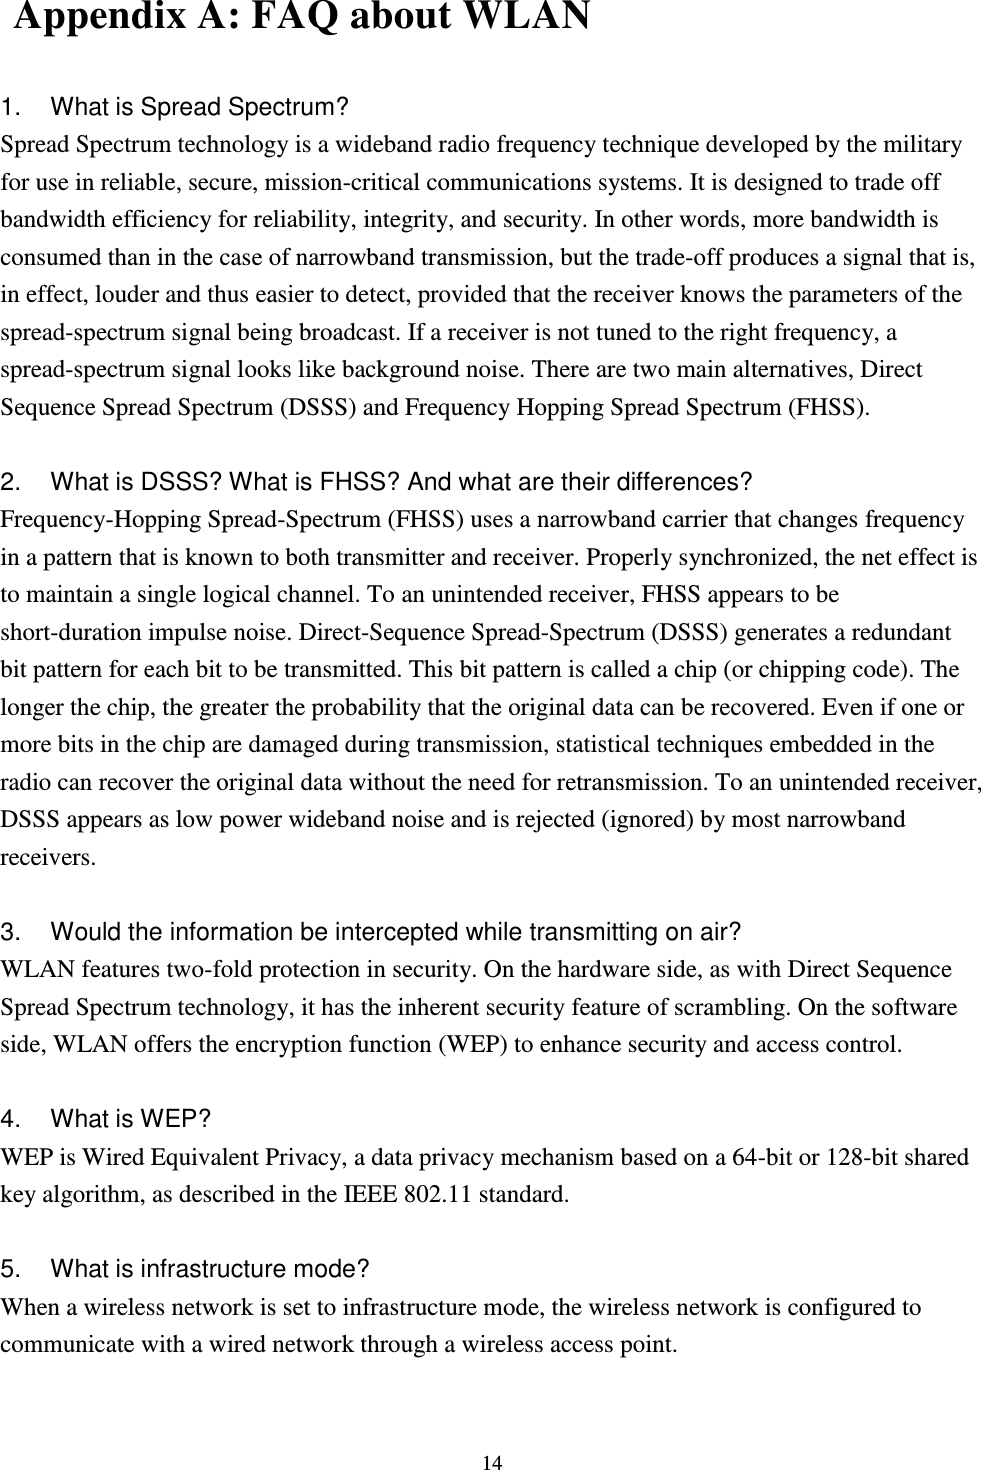  14  Appendix A: FAQ about WLAN  1.  What is Spread Spectrum? Spread Spectrum technology is a wideband radio frequency technique developed by the military for use in reliable, secure, mission-critical communications systems. It is designed to trade off bandwidth efficiency for reliability, integrity, and security. In other words, more bandwidth is consumed than in the case of narrowband transmission, but the trade-off produces a signal that is, in effect, louder and thus easier to detect, provided that the receiver knows the parameters of the spread-spectrum signal being broadcast. If a receiver is not tuned to the right frequency, a spread-spectrum signal looks like background noise. There are two main alternatives, Direct Sequence Spread Spectrum (DSSS) and Frequency Hopping Spread Spectrum (FHSS).  2.  What is DSSS? What is FHSS? And what are their differences? Frequency-Hopping Spread-Spectrum (FHSS) uses a narrowband carrier that changes frequency in a pattern that is known to both transmitter and receiver. Properly synchronized, the net effect is to maintain a single logical channel. To an unintended receiver, FHSS appears to be short-duration impulse noise. Direct-Sequence Spread-Spectrum (DSSS) generates a redundant bit pattern for each bit to be transmitted. This bit pattern is called a chip (or chipping code). The longer the chip, the greater the probability that the original data can be recovered. Even if one or more bits in the chip are damaged during transmission, statistical techniques embedded in the radio can recover the original data without the need for retransmission. To an unintended receiver, DSSS appears as low power wideband noise and is rejected (ignored) by most narrowband receivers.  3.  Would the information be intercepted while transmitting on air? WLAN features two-fold protection in security. On the hardware side, as with Direct Sequence Spread Spectrum technology, it has the inherent security feature of scrambling. On the software side, WLAN offers the encryption function (WEP) to enhance security and access control.  4.  What is WEP? WEP is Wired Equivalent Privacy, a data privacy mechanism based on a 64-bit or 128-bit shared key algorithm, as described in the IEEE 802.11 standard.    5.  What is infrastructure mode? When a wireless network is set to infrastructure mode, the wireless network is configured to communicate with a wired network through a wireless access point.  